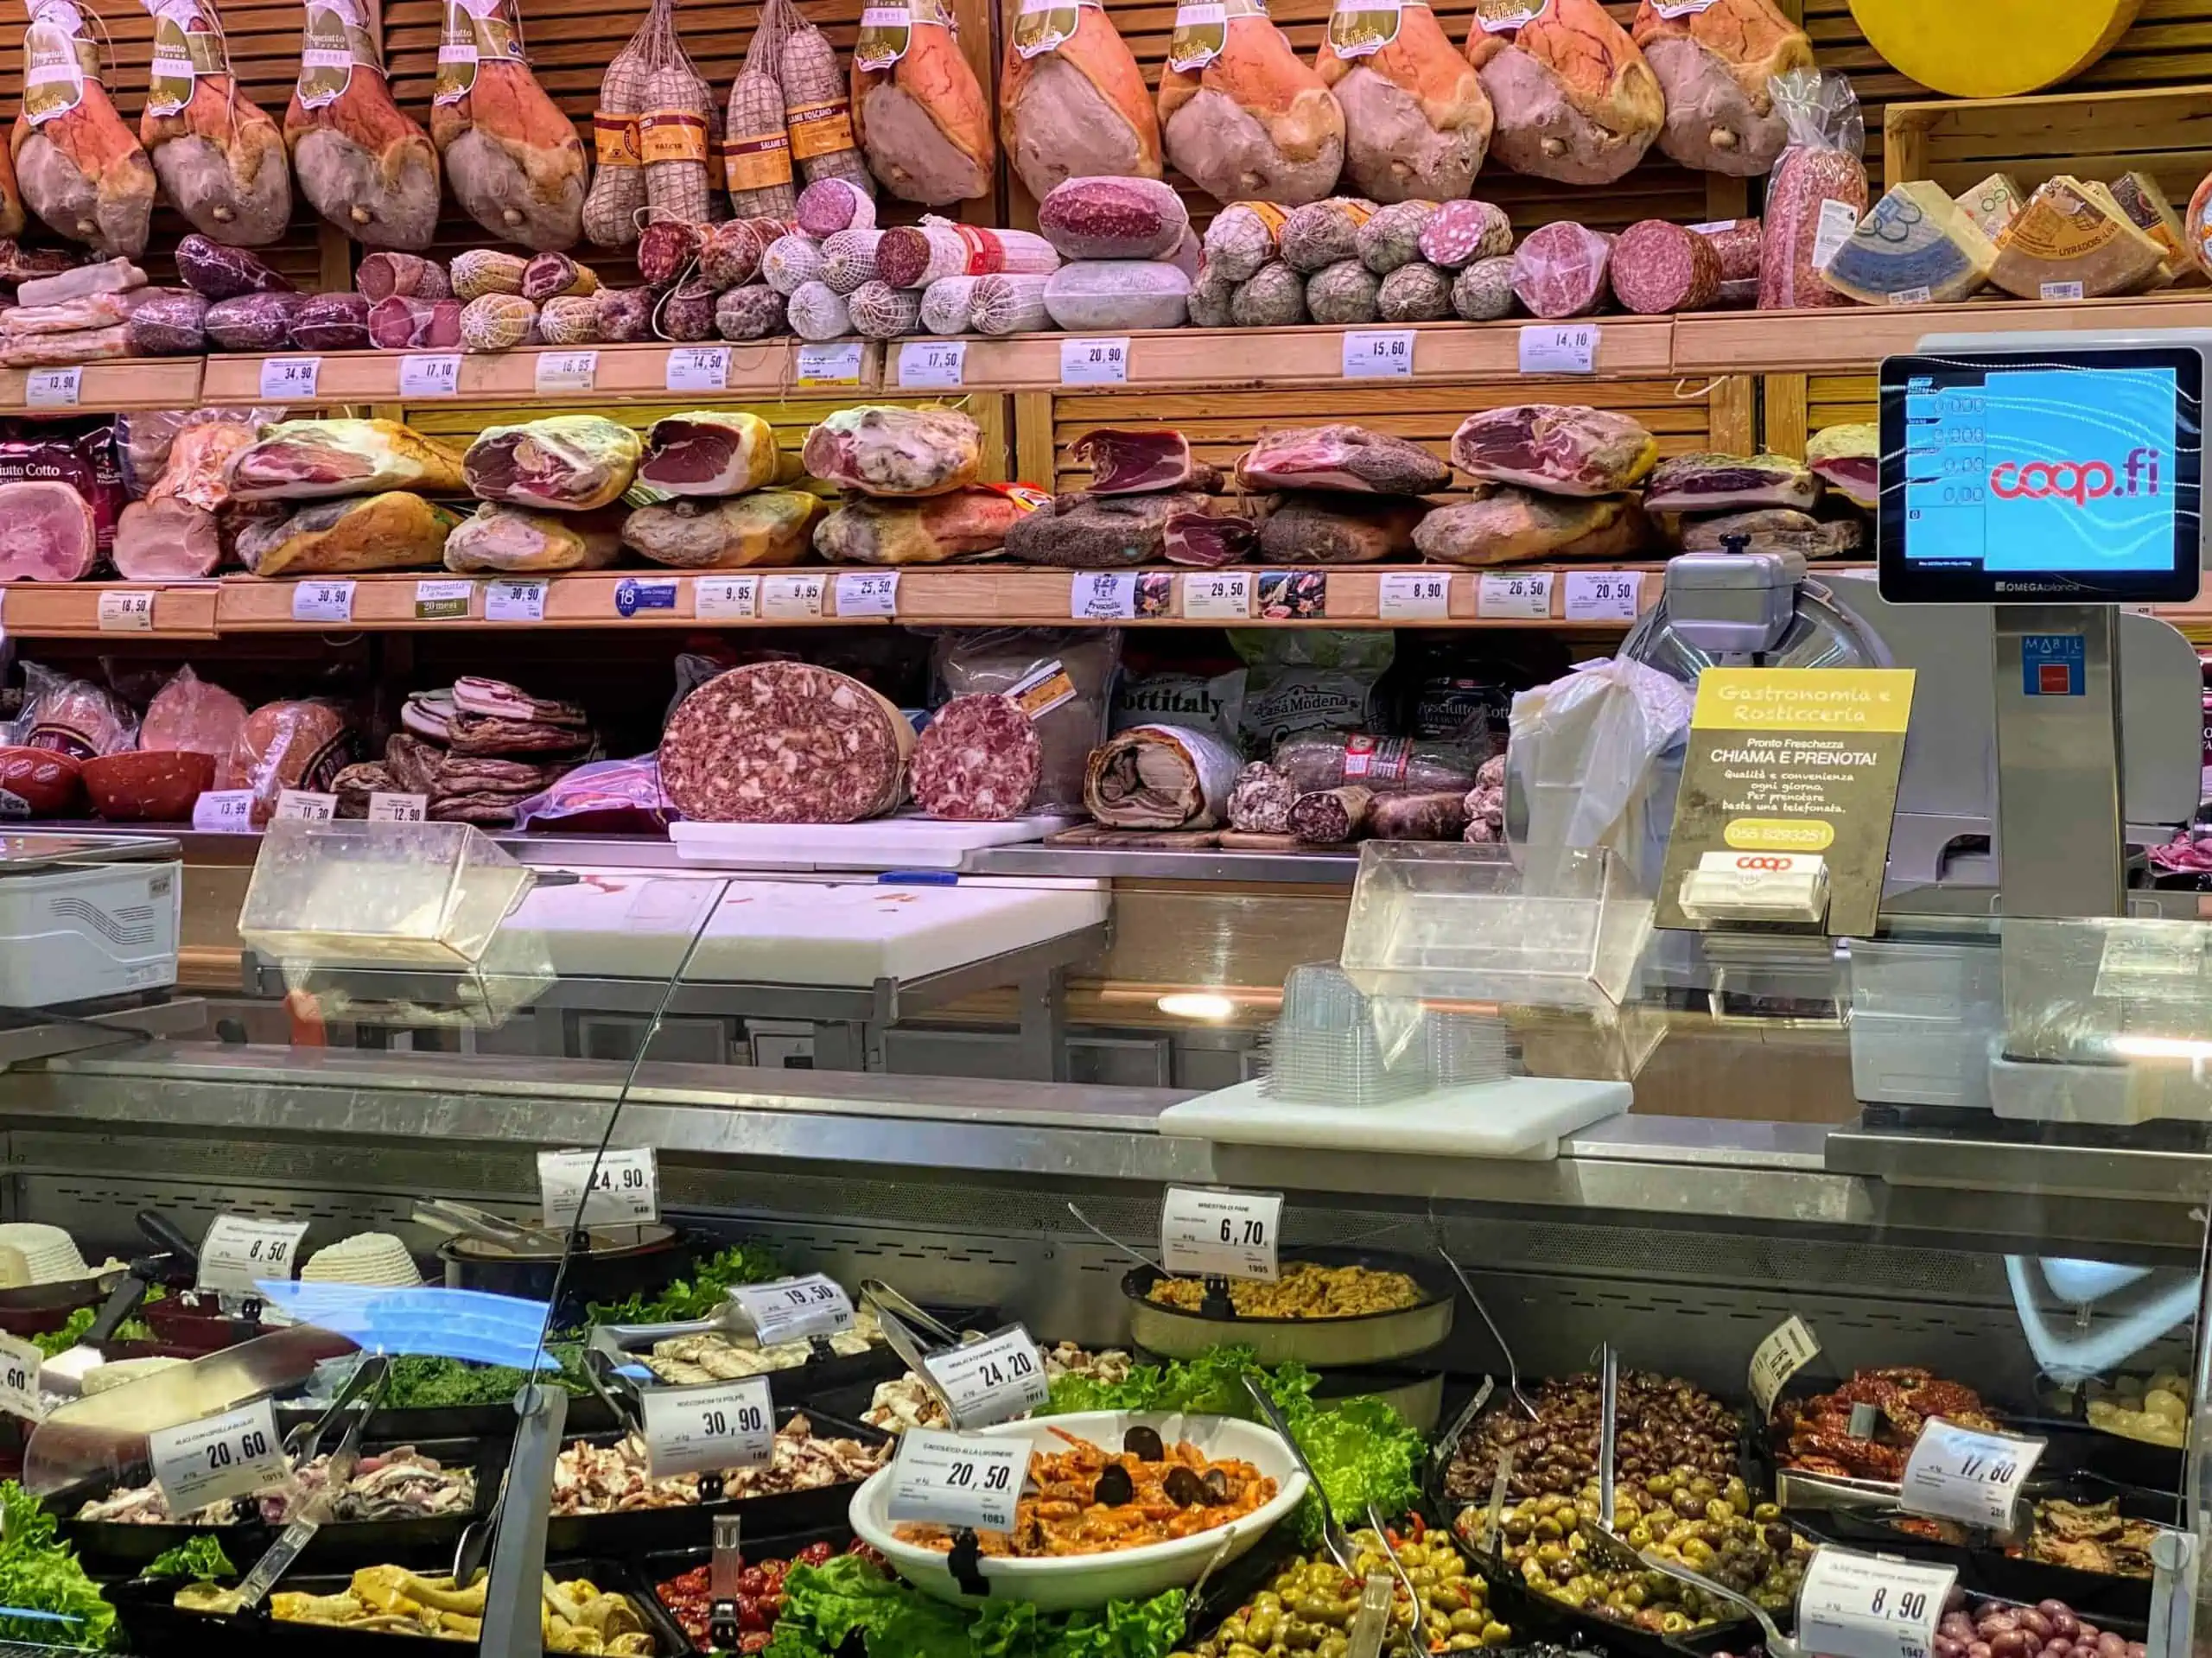 Deli section in an Italian grocery store. You can see cured meats on shelves and salads.